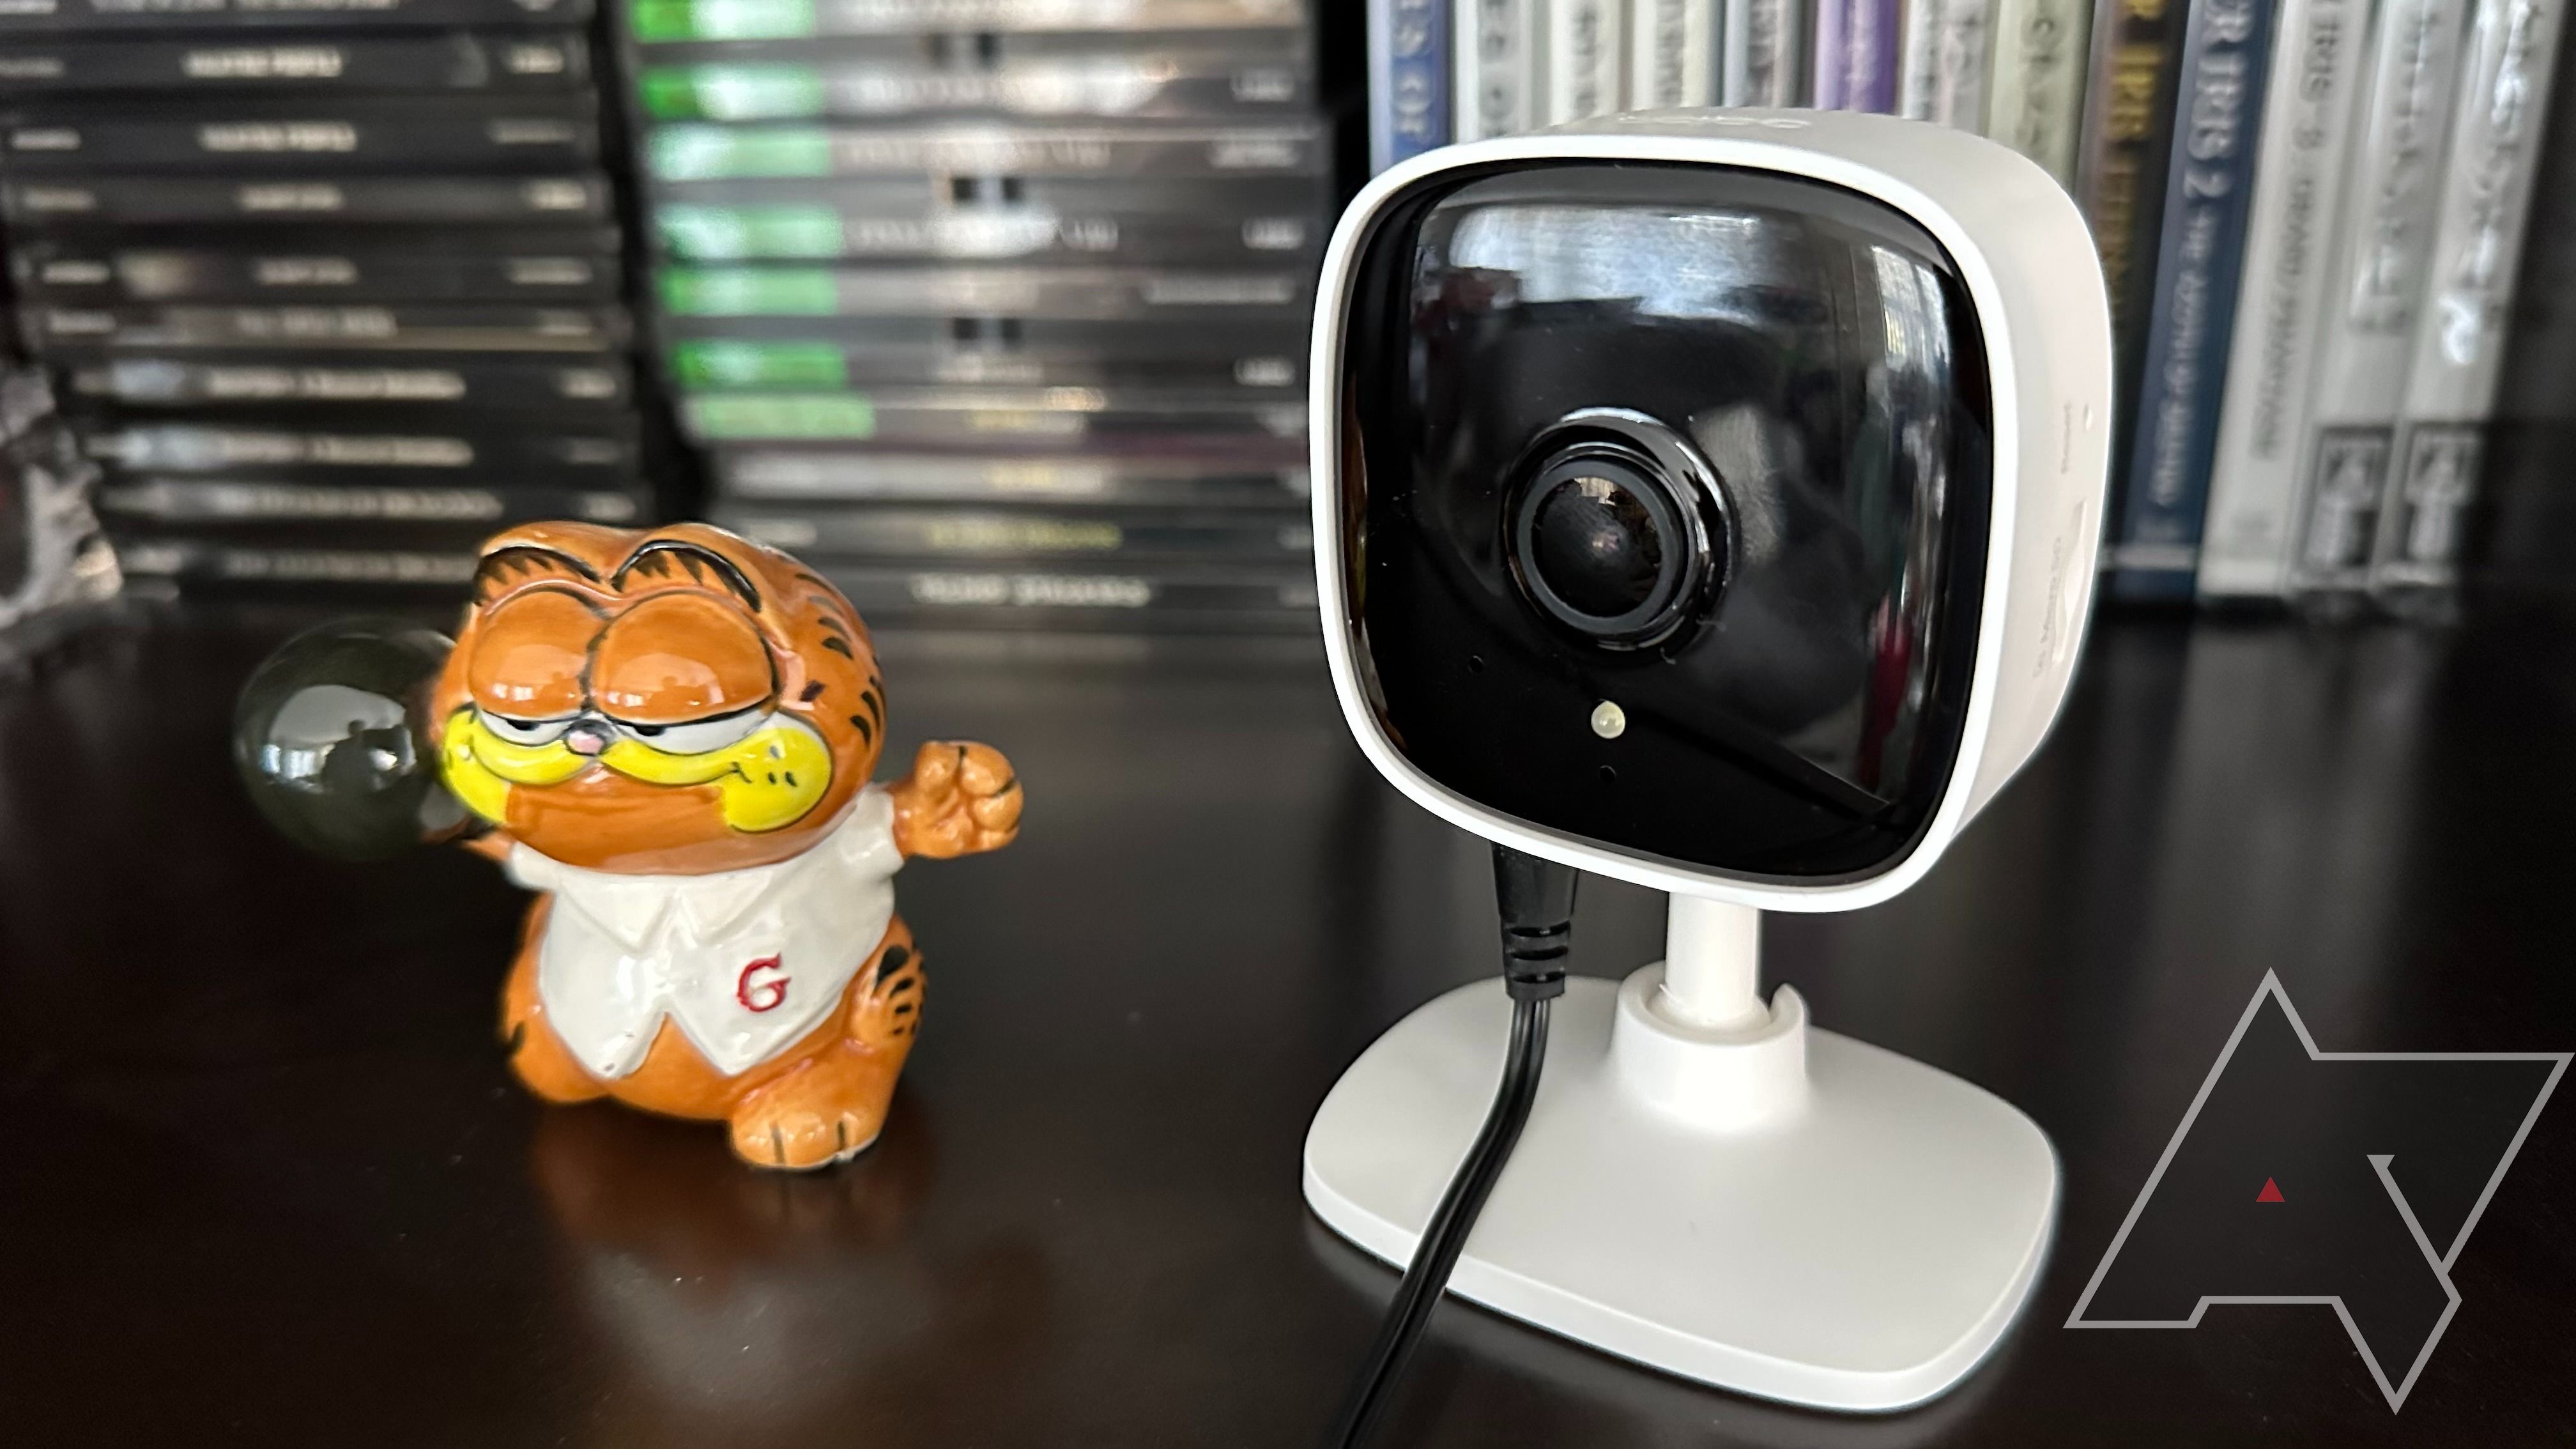 Tapo C100 Home Security Wi-Fi Camera review: an incredible budget buy, and  friend to the privacy-conscious